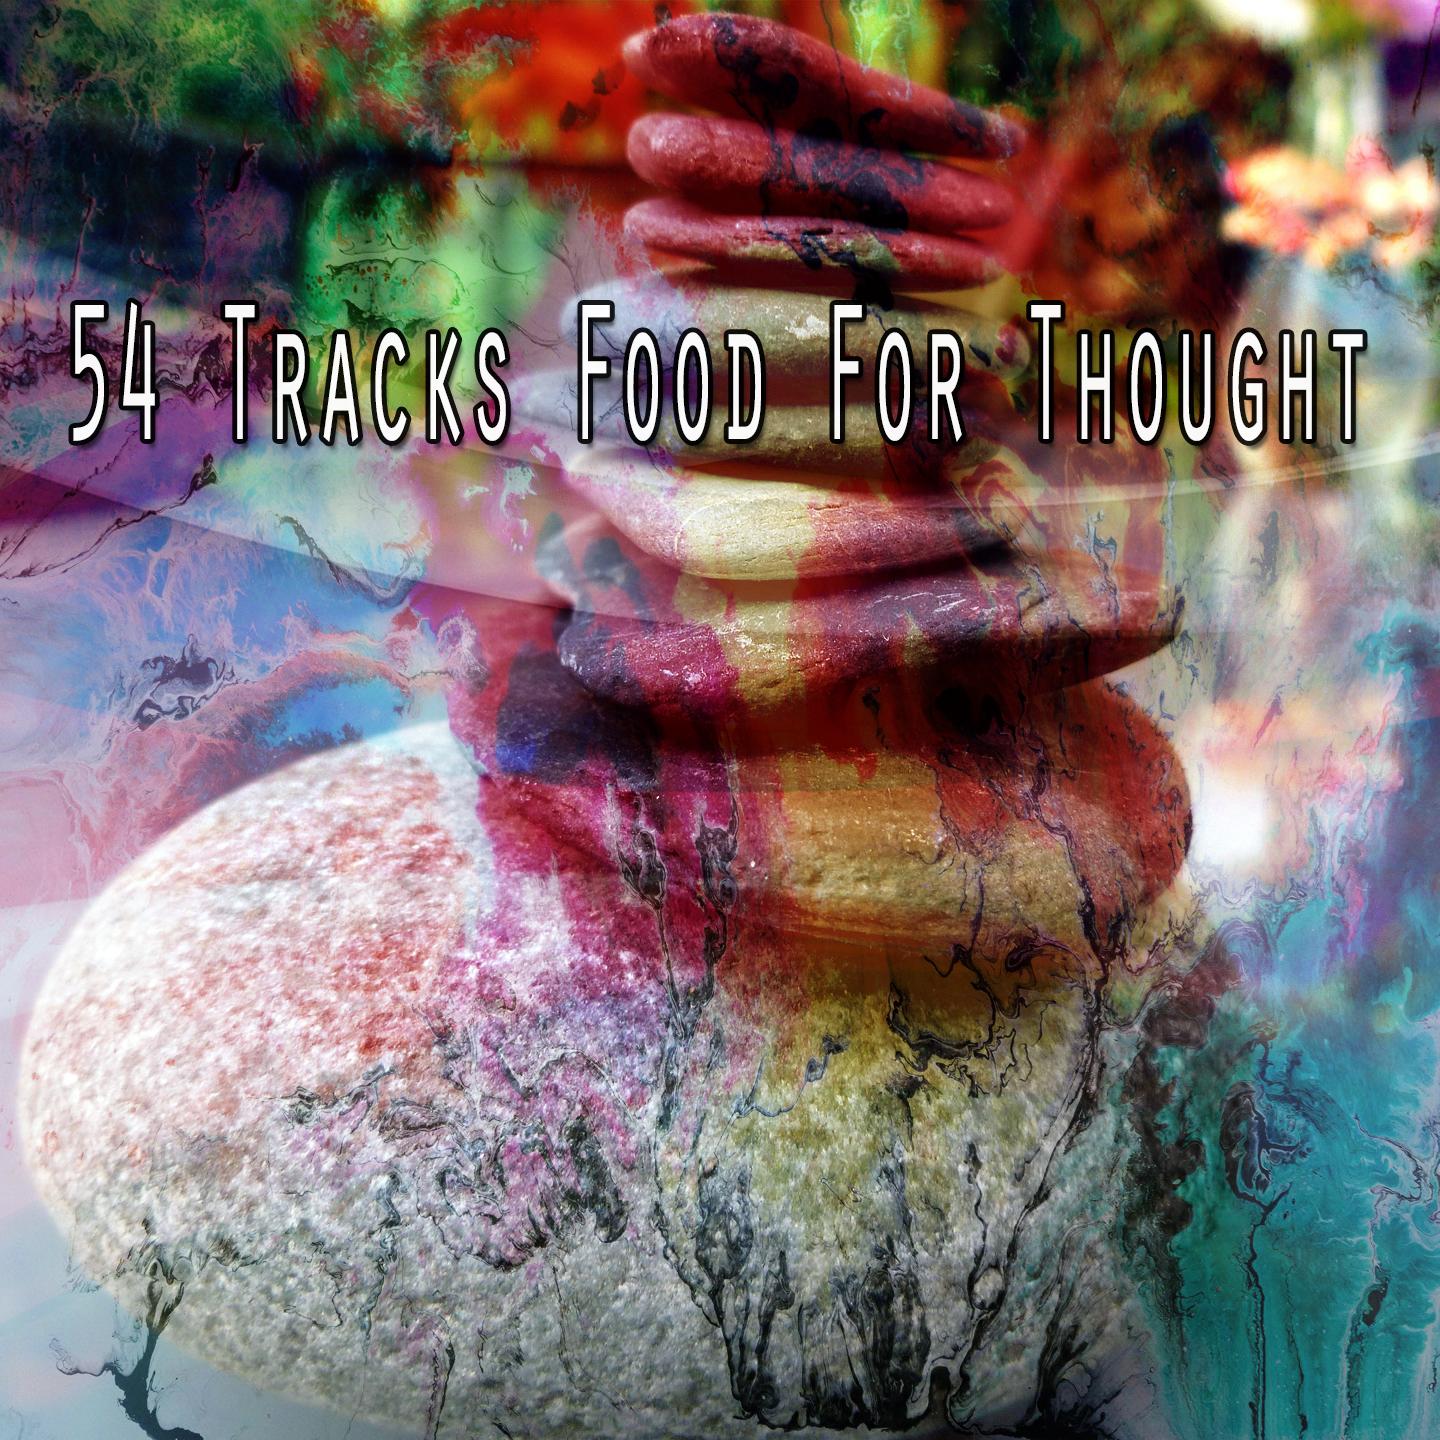 54 Tracks Food for Thought